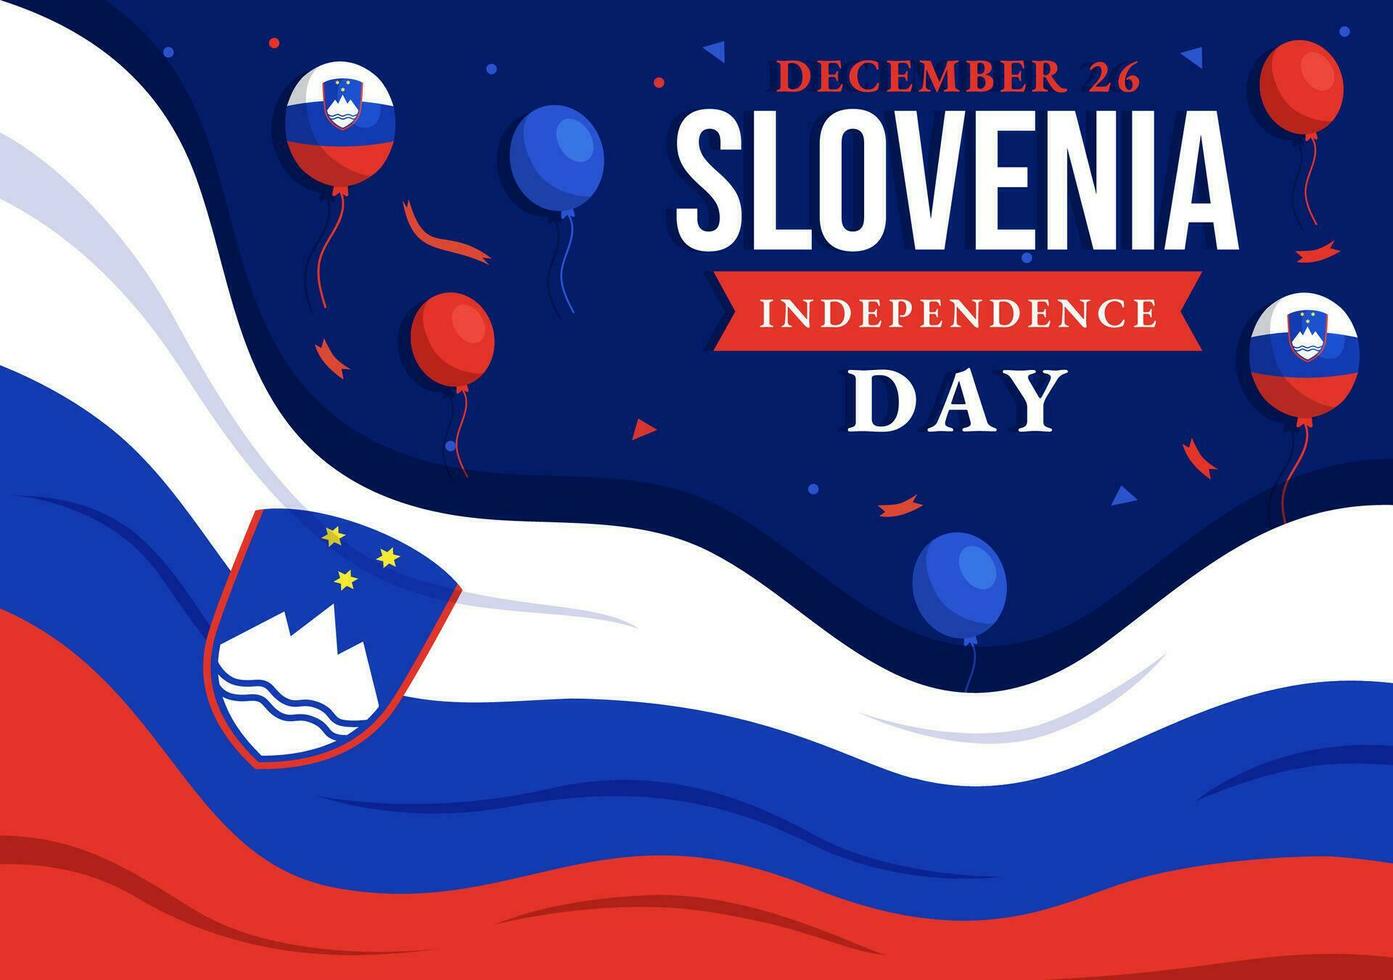 Slovenia Independence Day Vector Illustration on 26 December with Waving Flag Background Design in National Unity Holiday Celebration Flat Cartoon